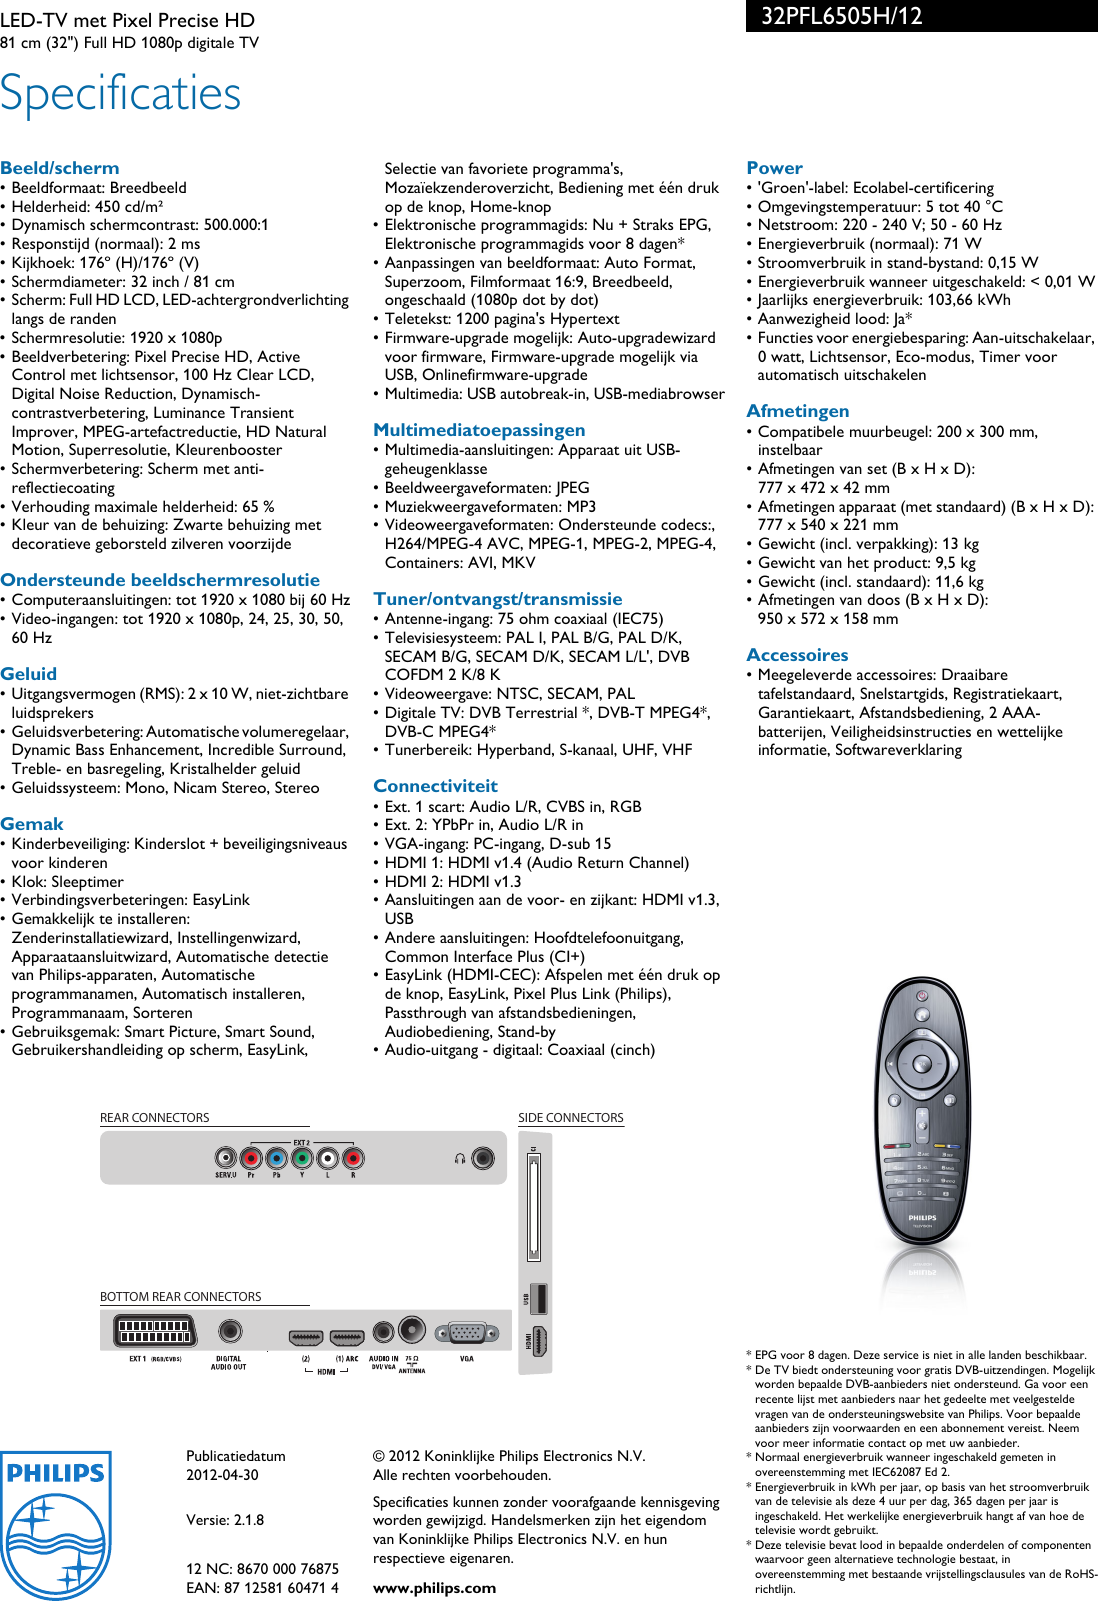 Page 3 of 3 - Philips 32PFL6505H/12 LED-TV Met Pixel Precise HD User Manual Brochure 32pfl6505h 12 Pss Nldbe